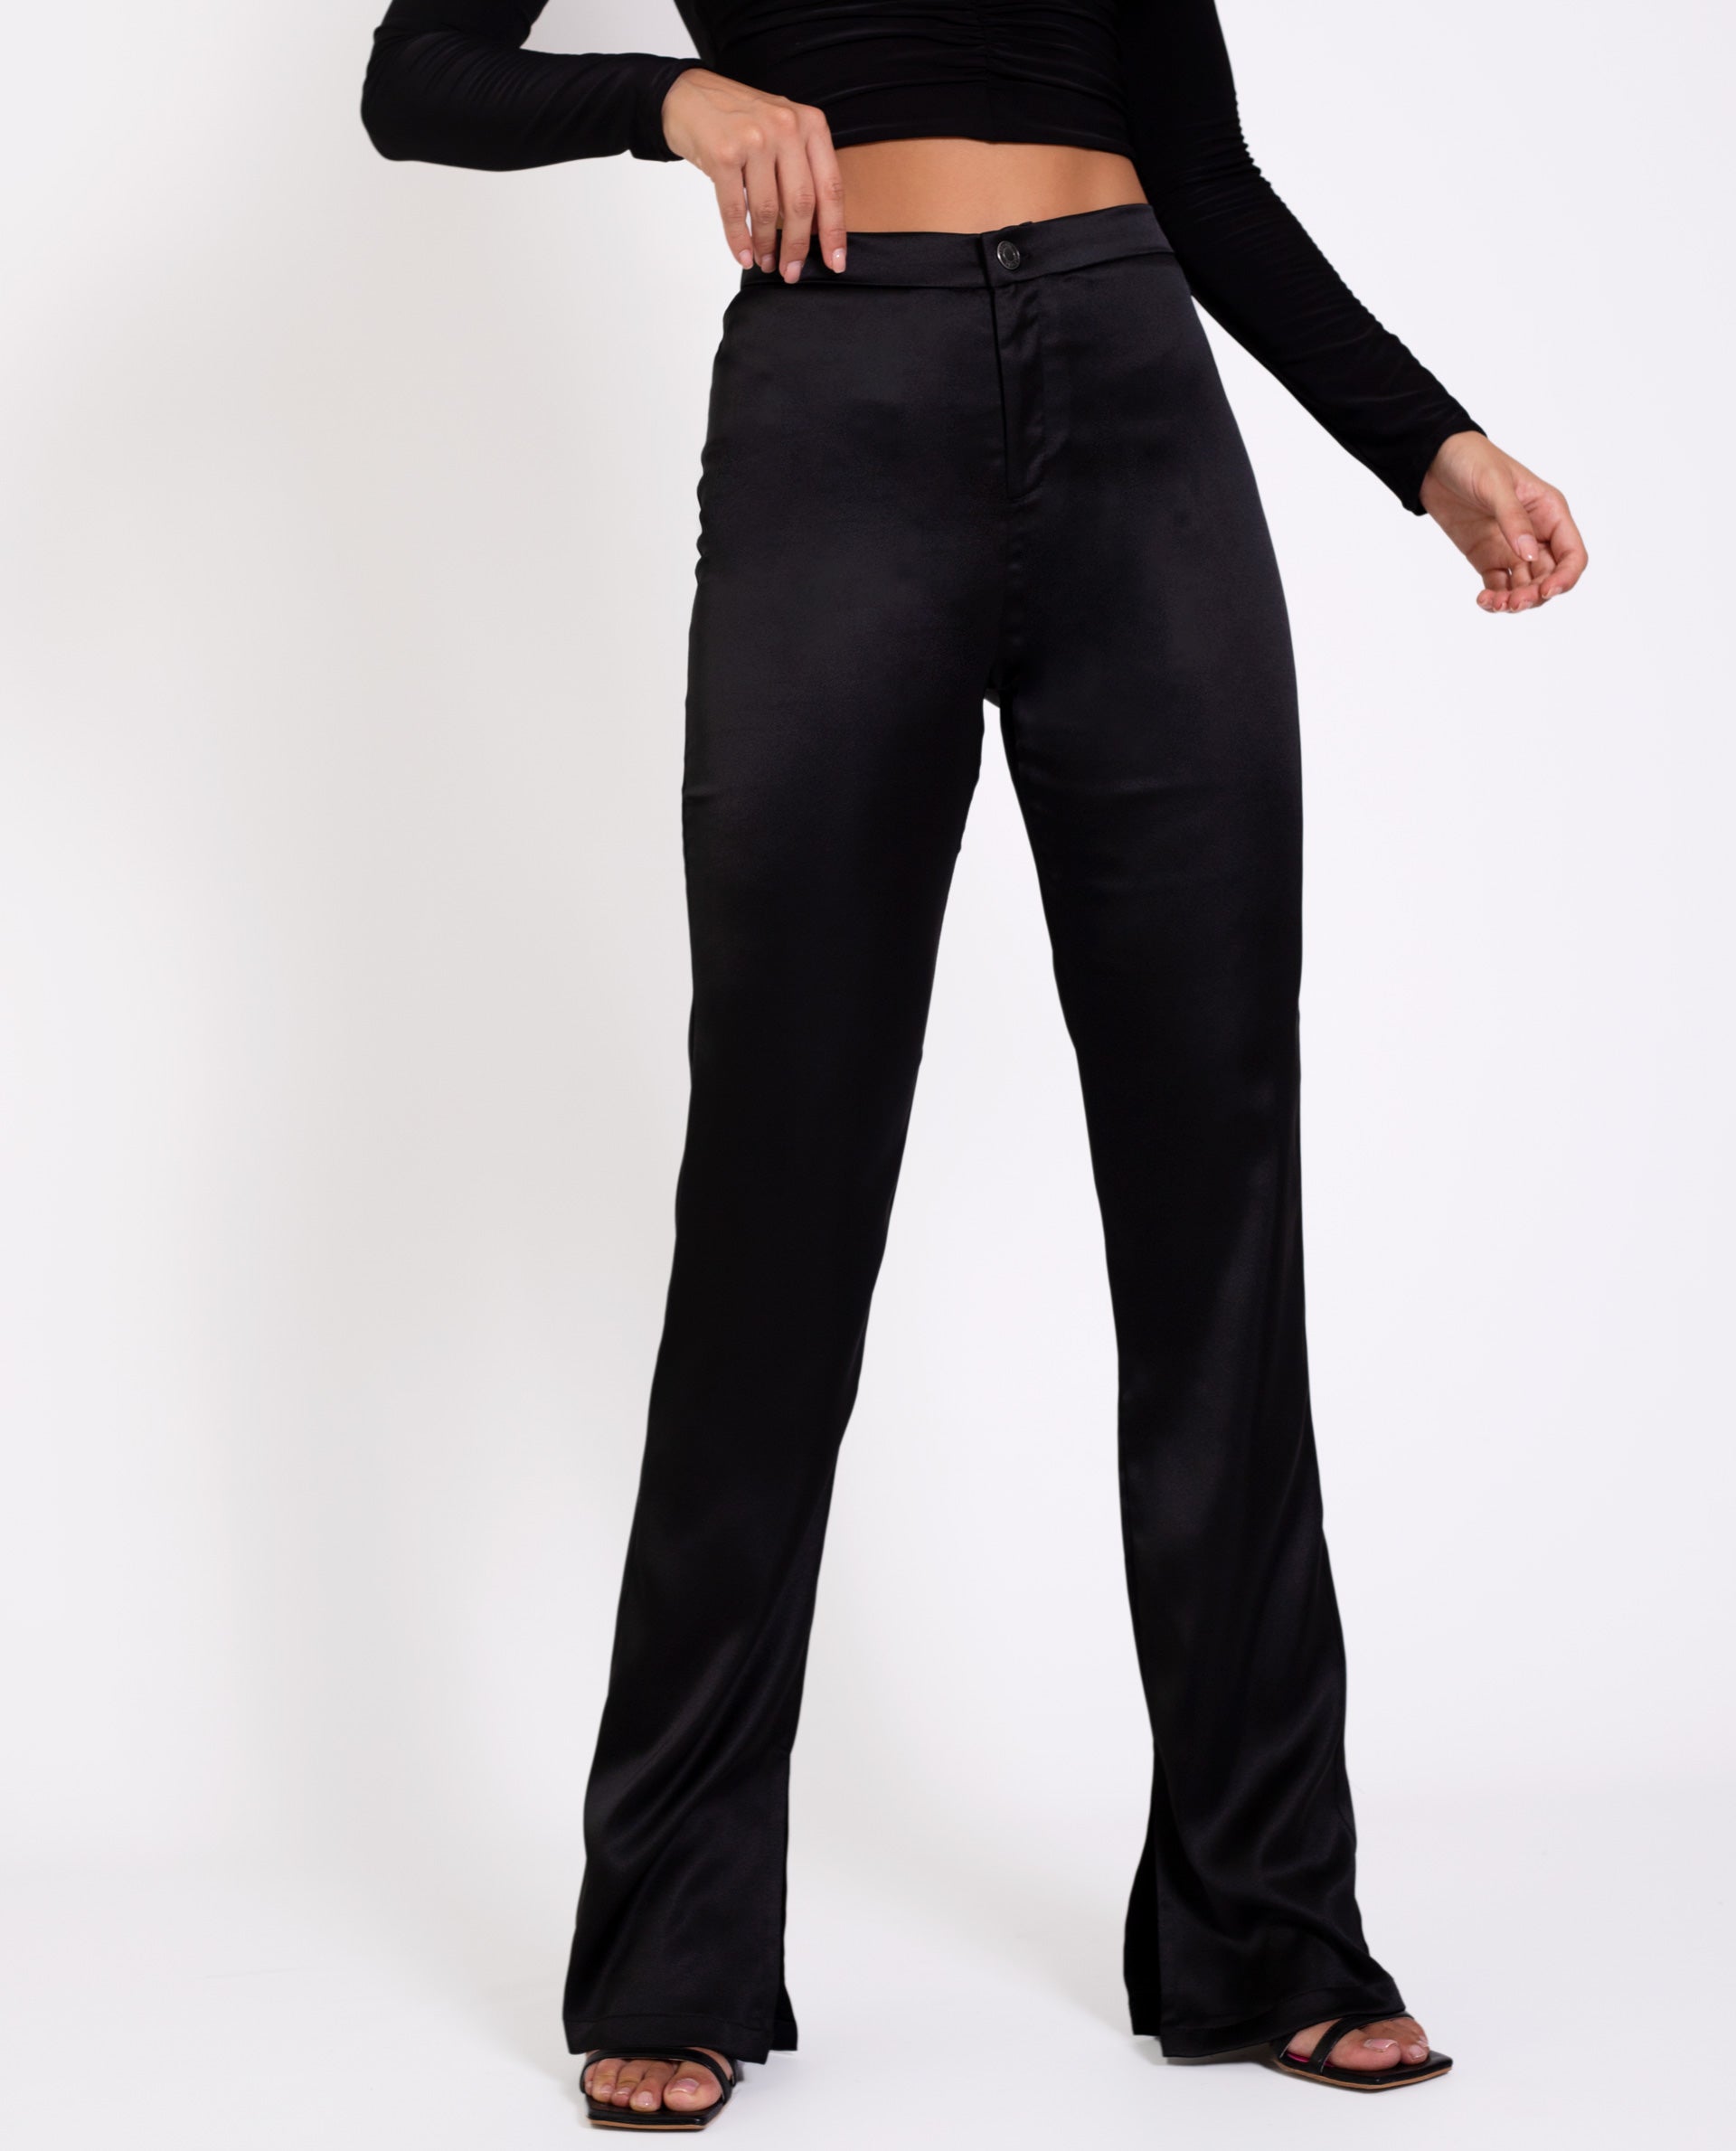 Women's Black Pants Bell Collection THE-ARE